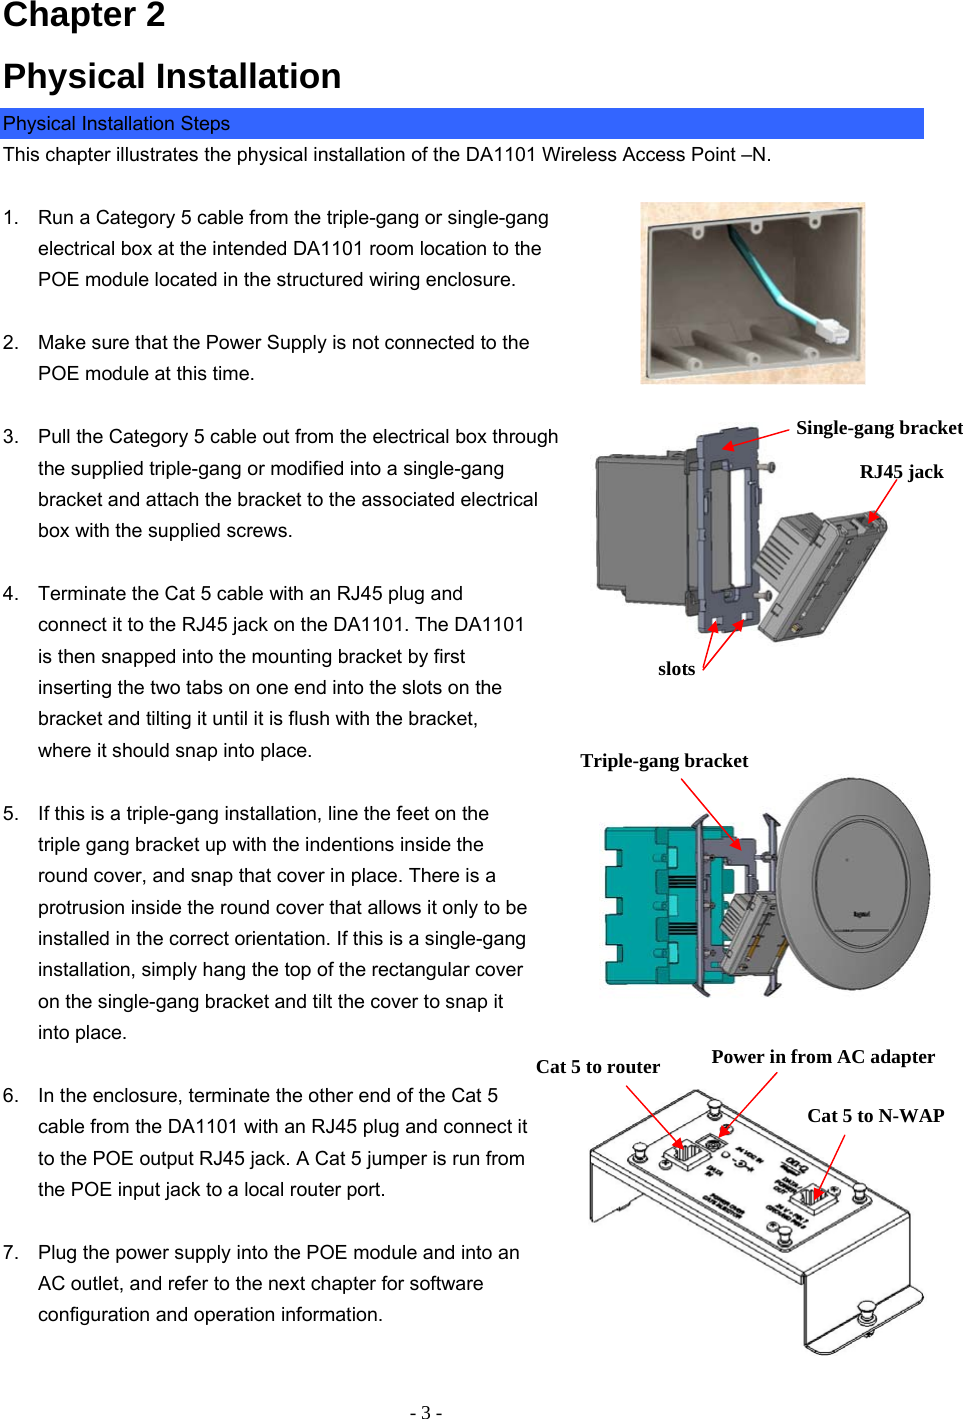 - 3 - Chapter 2 Physical Installation Physical Installation Steps This chapter illustrates the physical installation of the DA1101 Wireless Access Point –N.  1.  Run a Category 5 cable from the triple-gang or single-gang electrical box at the intended DA1101 room location to the POE module located in the structured wiring enclosure.  2.   Make sure that the Power Supply is not connected to the POE module at this time.   3.  Pull the Category 5 cable out from the electrical box through the supplied triple-gang or modified into a single-gang bracket and attach the bracket to the associated electrical box with the supplied screws.   4.  Terminate the Cat 5 cable with an RJ45 plug and connect it to the RJ45 jack on the DA1101. The DA1101 is then snapped into the mounting bracket by first inserting the two tabs on one end into the slots on the bracket and tilting it until it is flush with the bracket, where it should snap into place.   5.  If this is a triple-gang installation, line the feet on the triple gang bracket up with the indentions inside the round cover, and snap that cover in place. There is a protrusion inside the round cover that allows it only to be installed in the correct orientation. If this is a single-gang installation, simply hang the top of the rectangular cover on the single-gang bracket and tilt the cover to snap it into place.  6.  In the enclosure, terminate the other end of the Cat 5 cable from the DA1101 with an RJ45 plug and connect it to the POE output RJ45 jack. A Cat 5 jumper is run from the POE input jack to a local router port.  7.  Plug the power supply into the POE module and into an AC outlet, and refer to the next chapter for software configuration and operation information.    slots   Single-gang bracket RJ45 jack  Triple-gang bracket Power in from AC adapter Cat 5 to N-WAP Cat 5 to router 